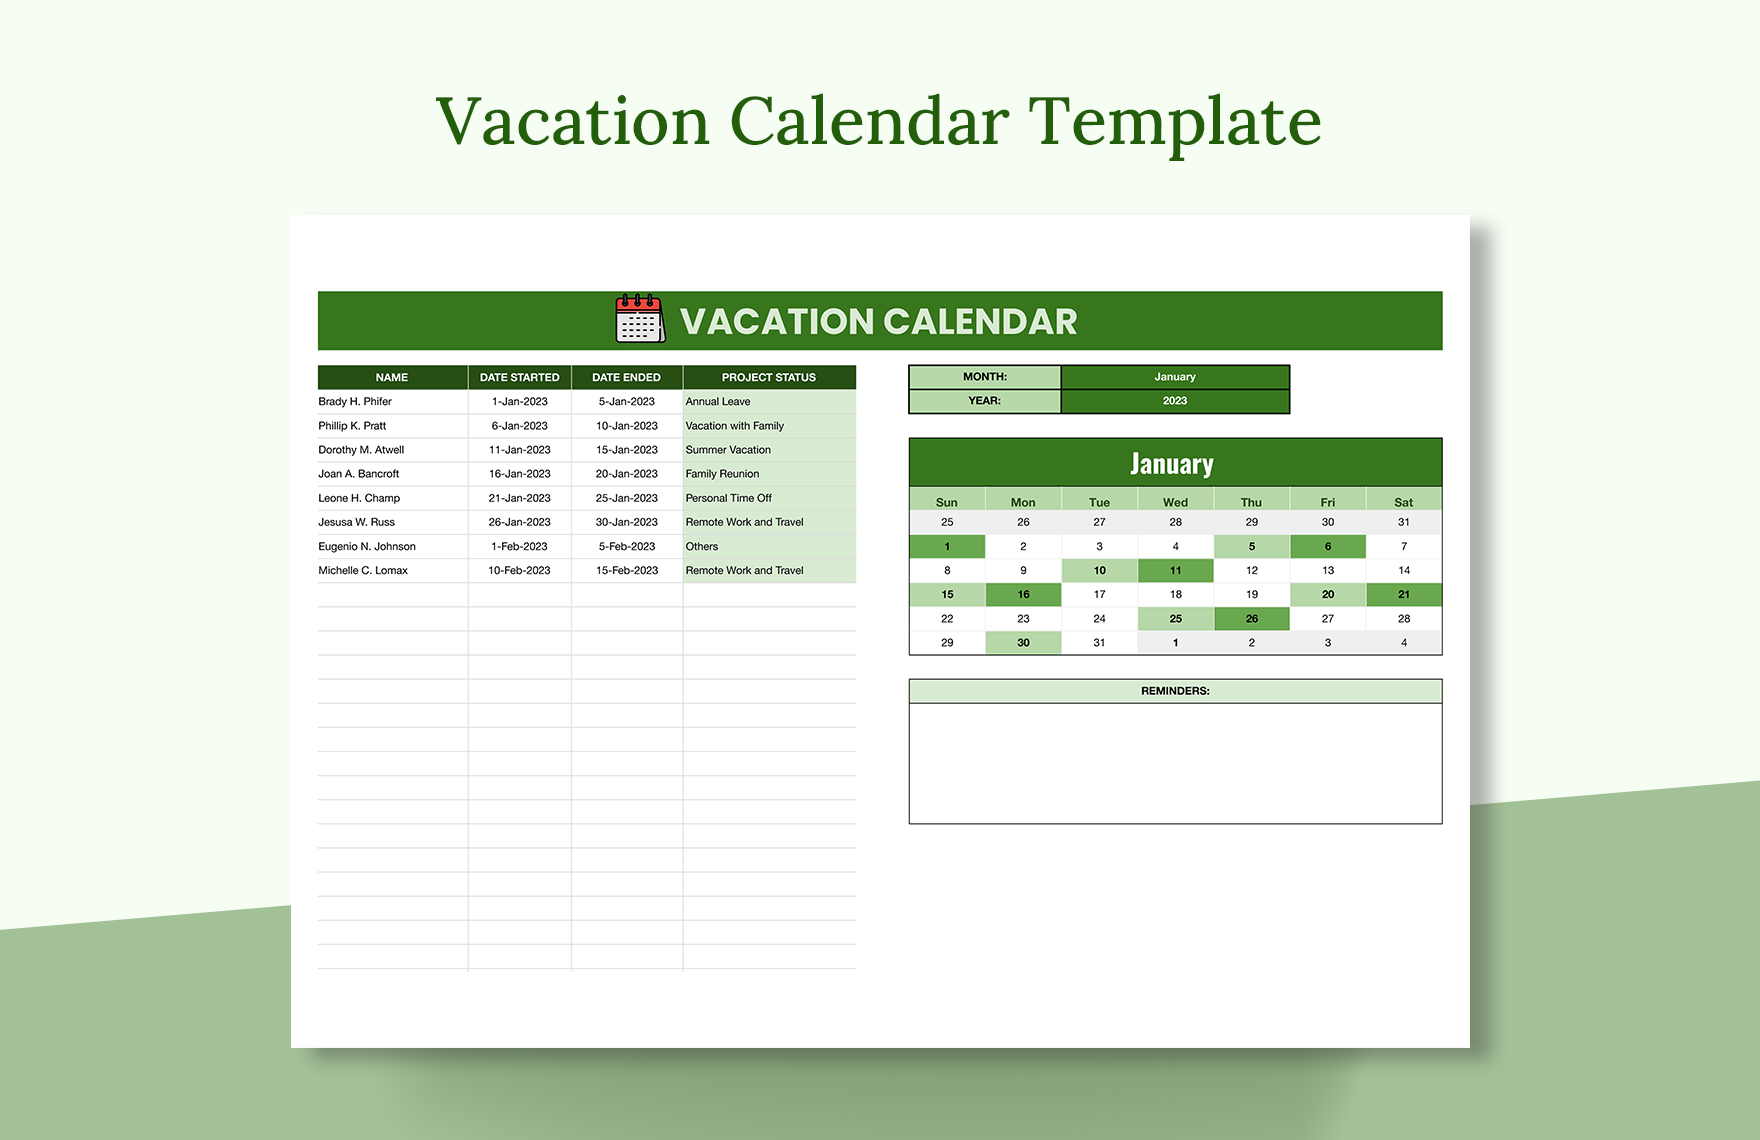 Vacation Calendar Template Download in Excel, Google Sheets